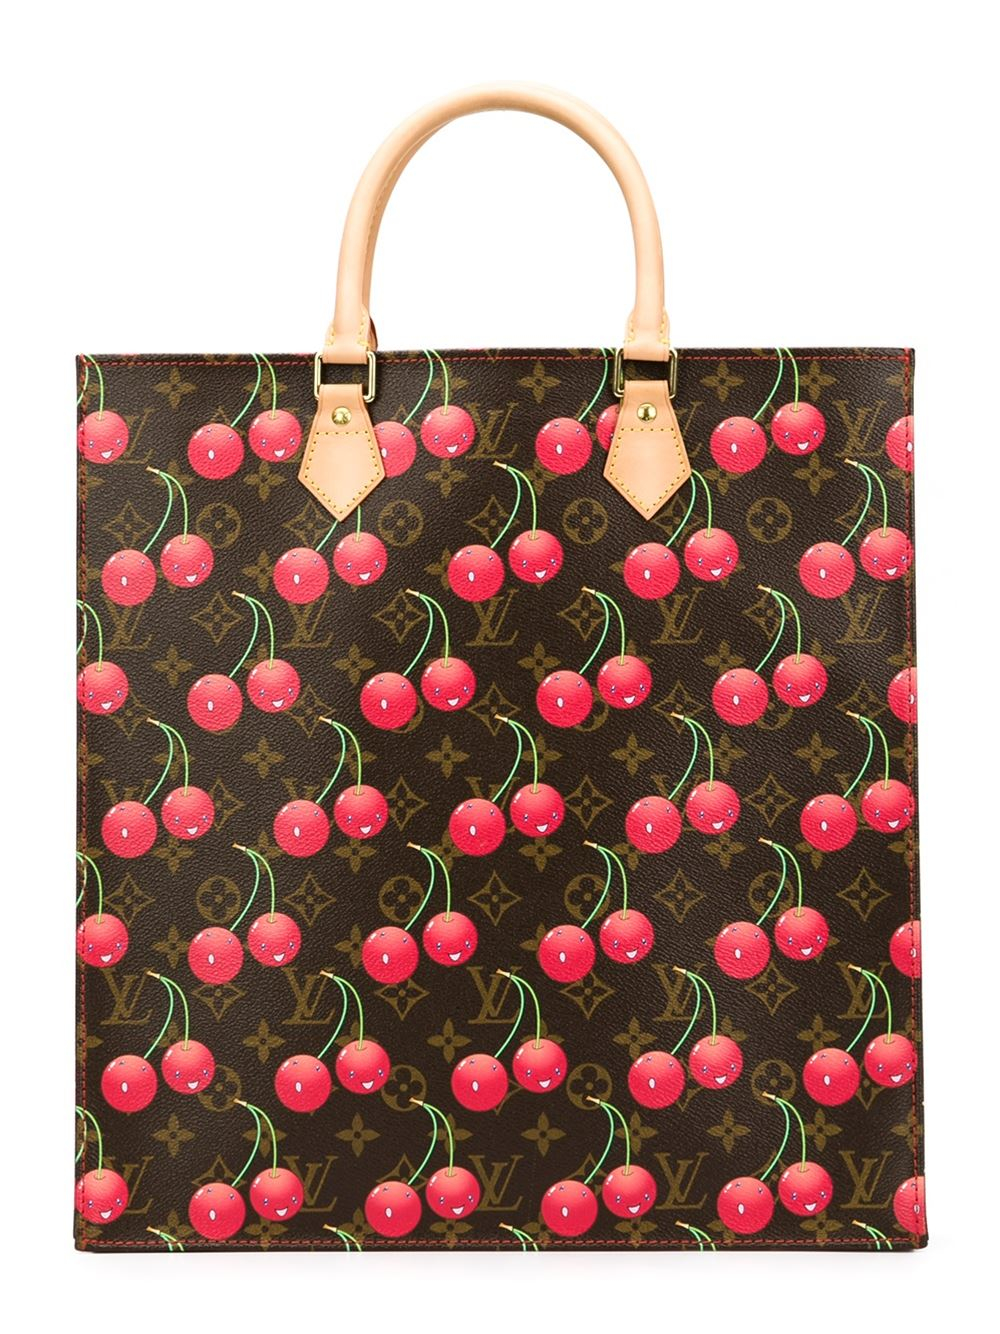 Lyst - Louis Vuitton Cherry Print Tote in Brown